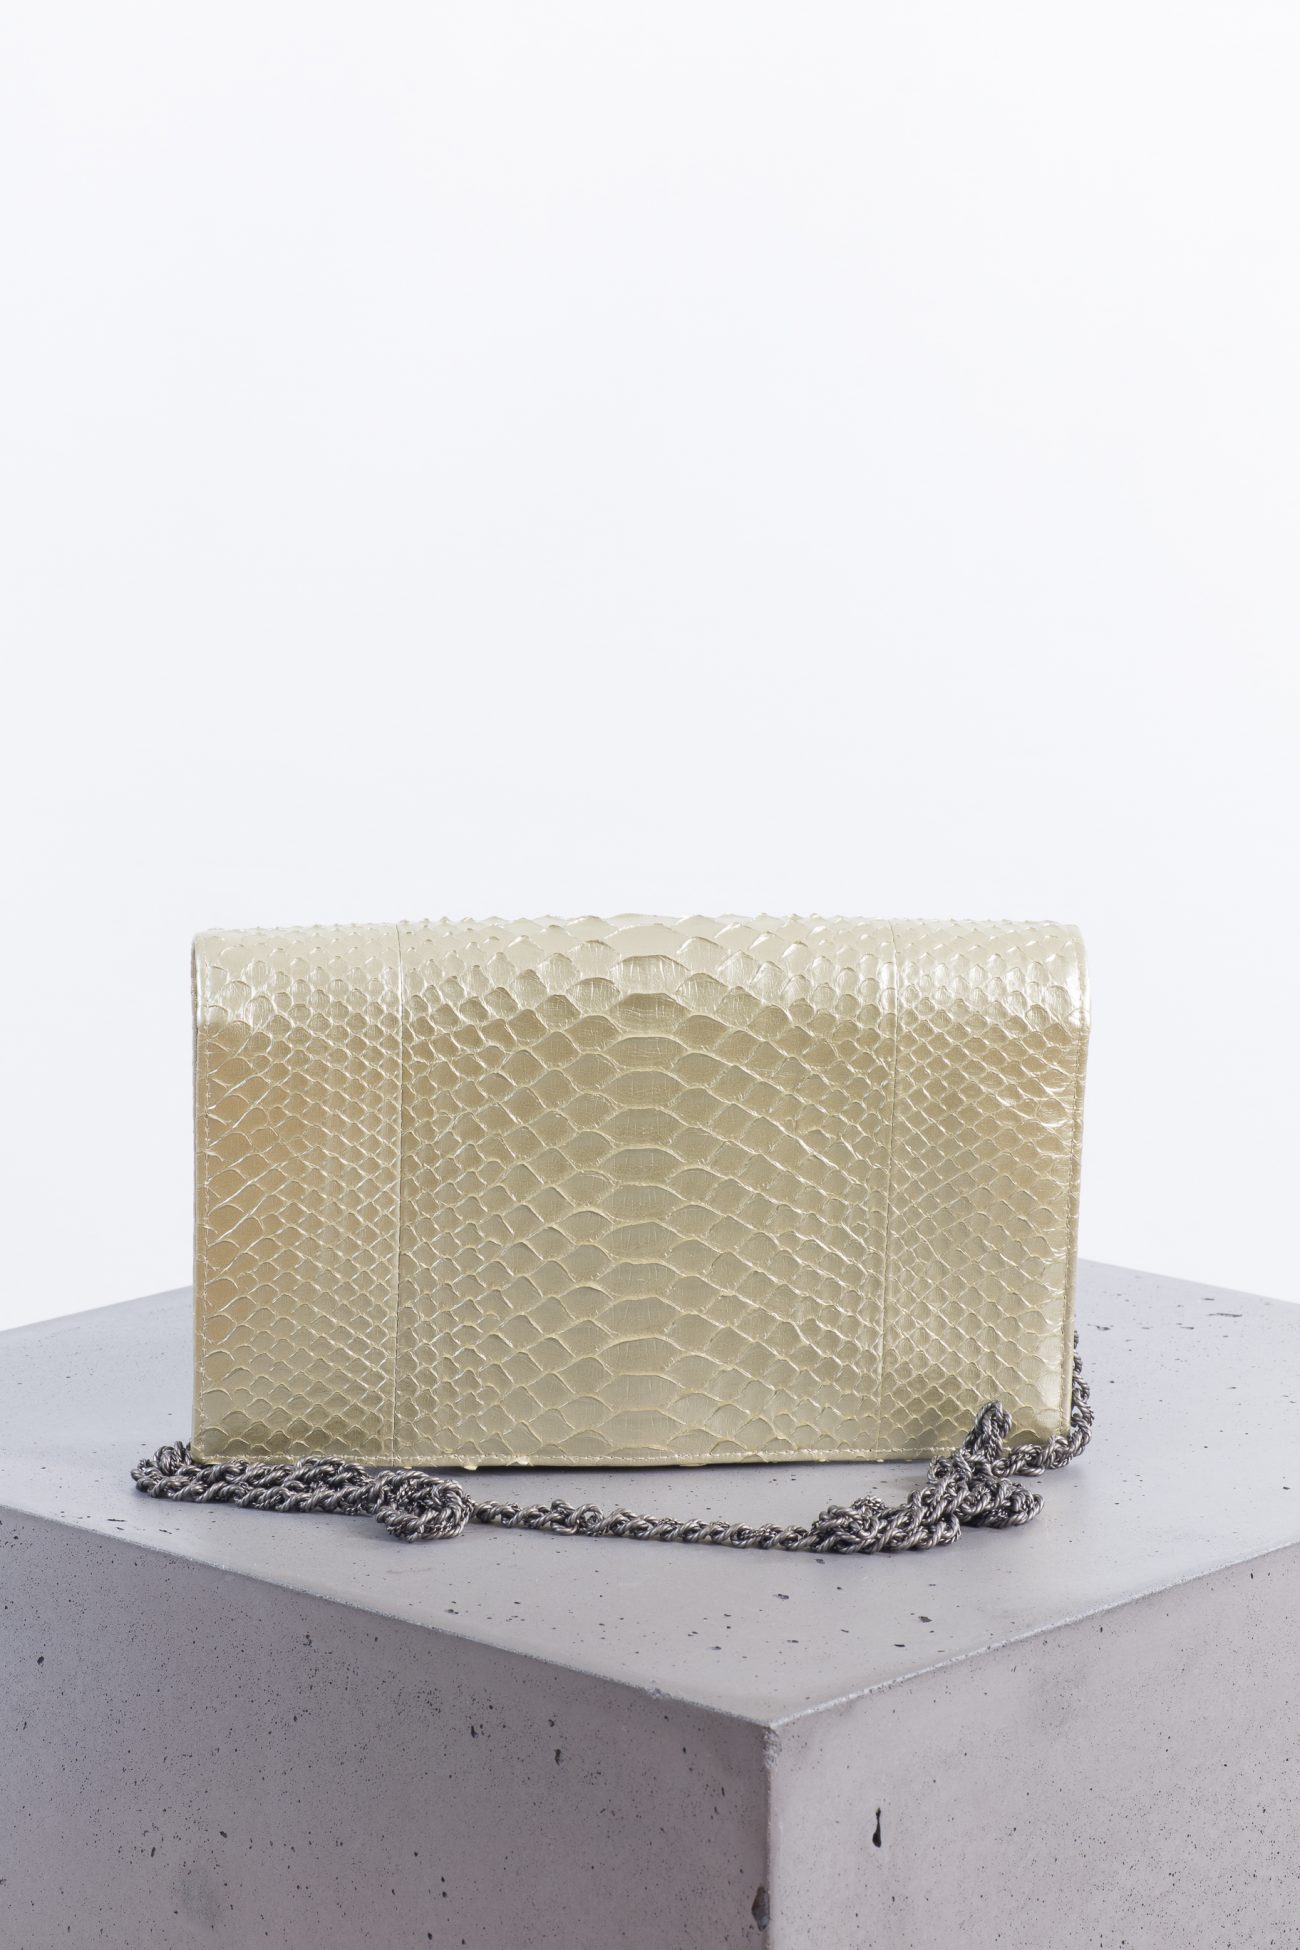 Chanel Python leather pochette from 17A collection